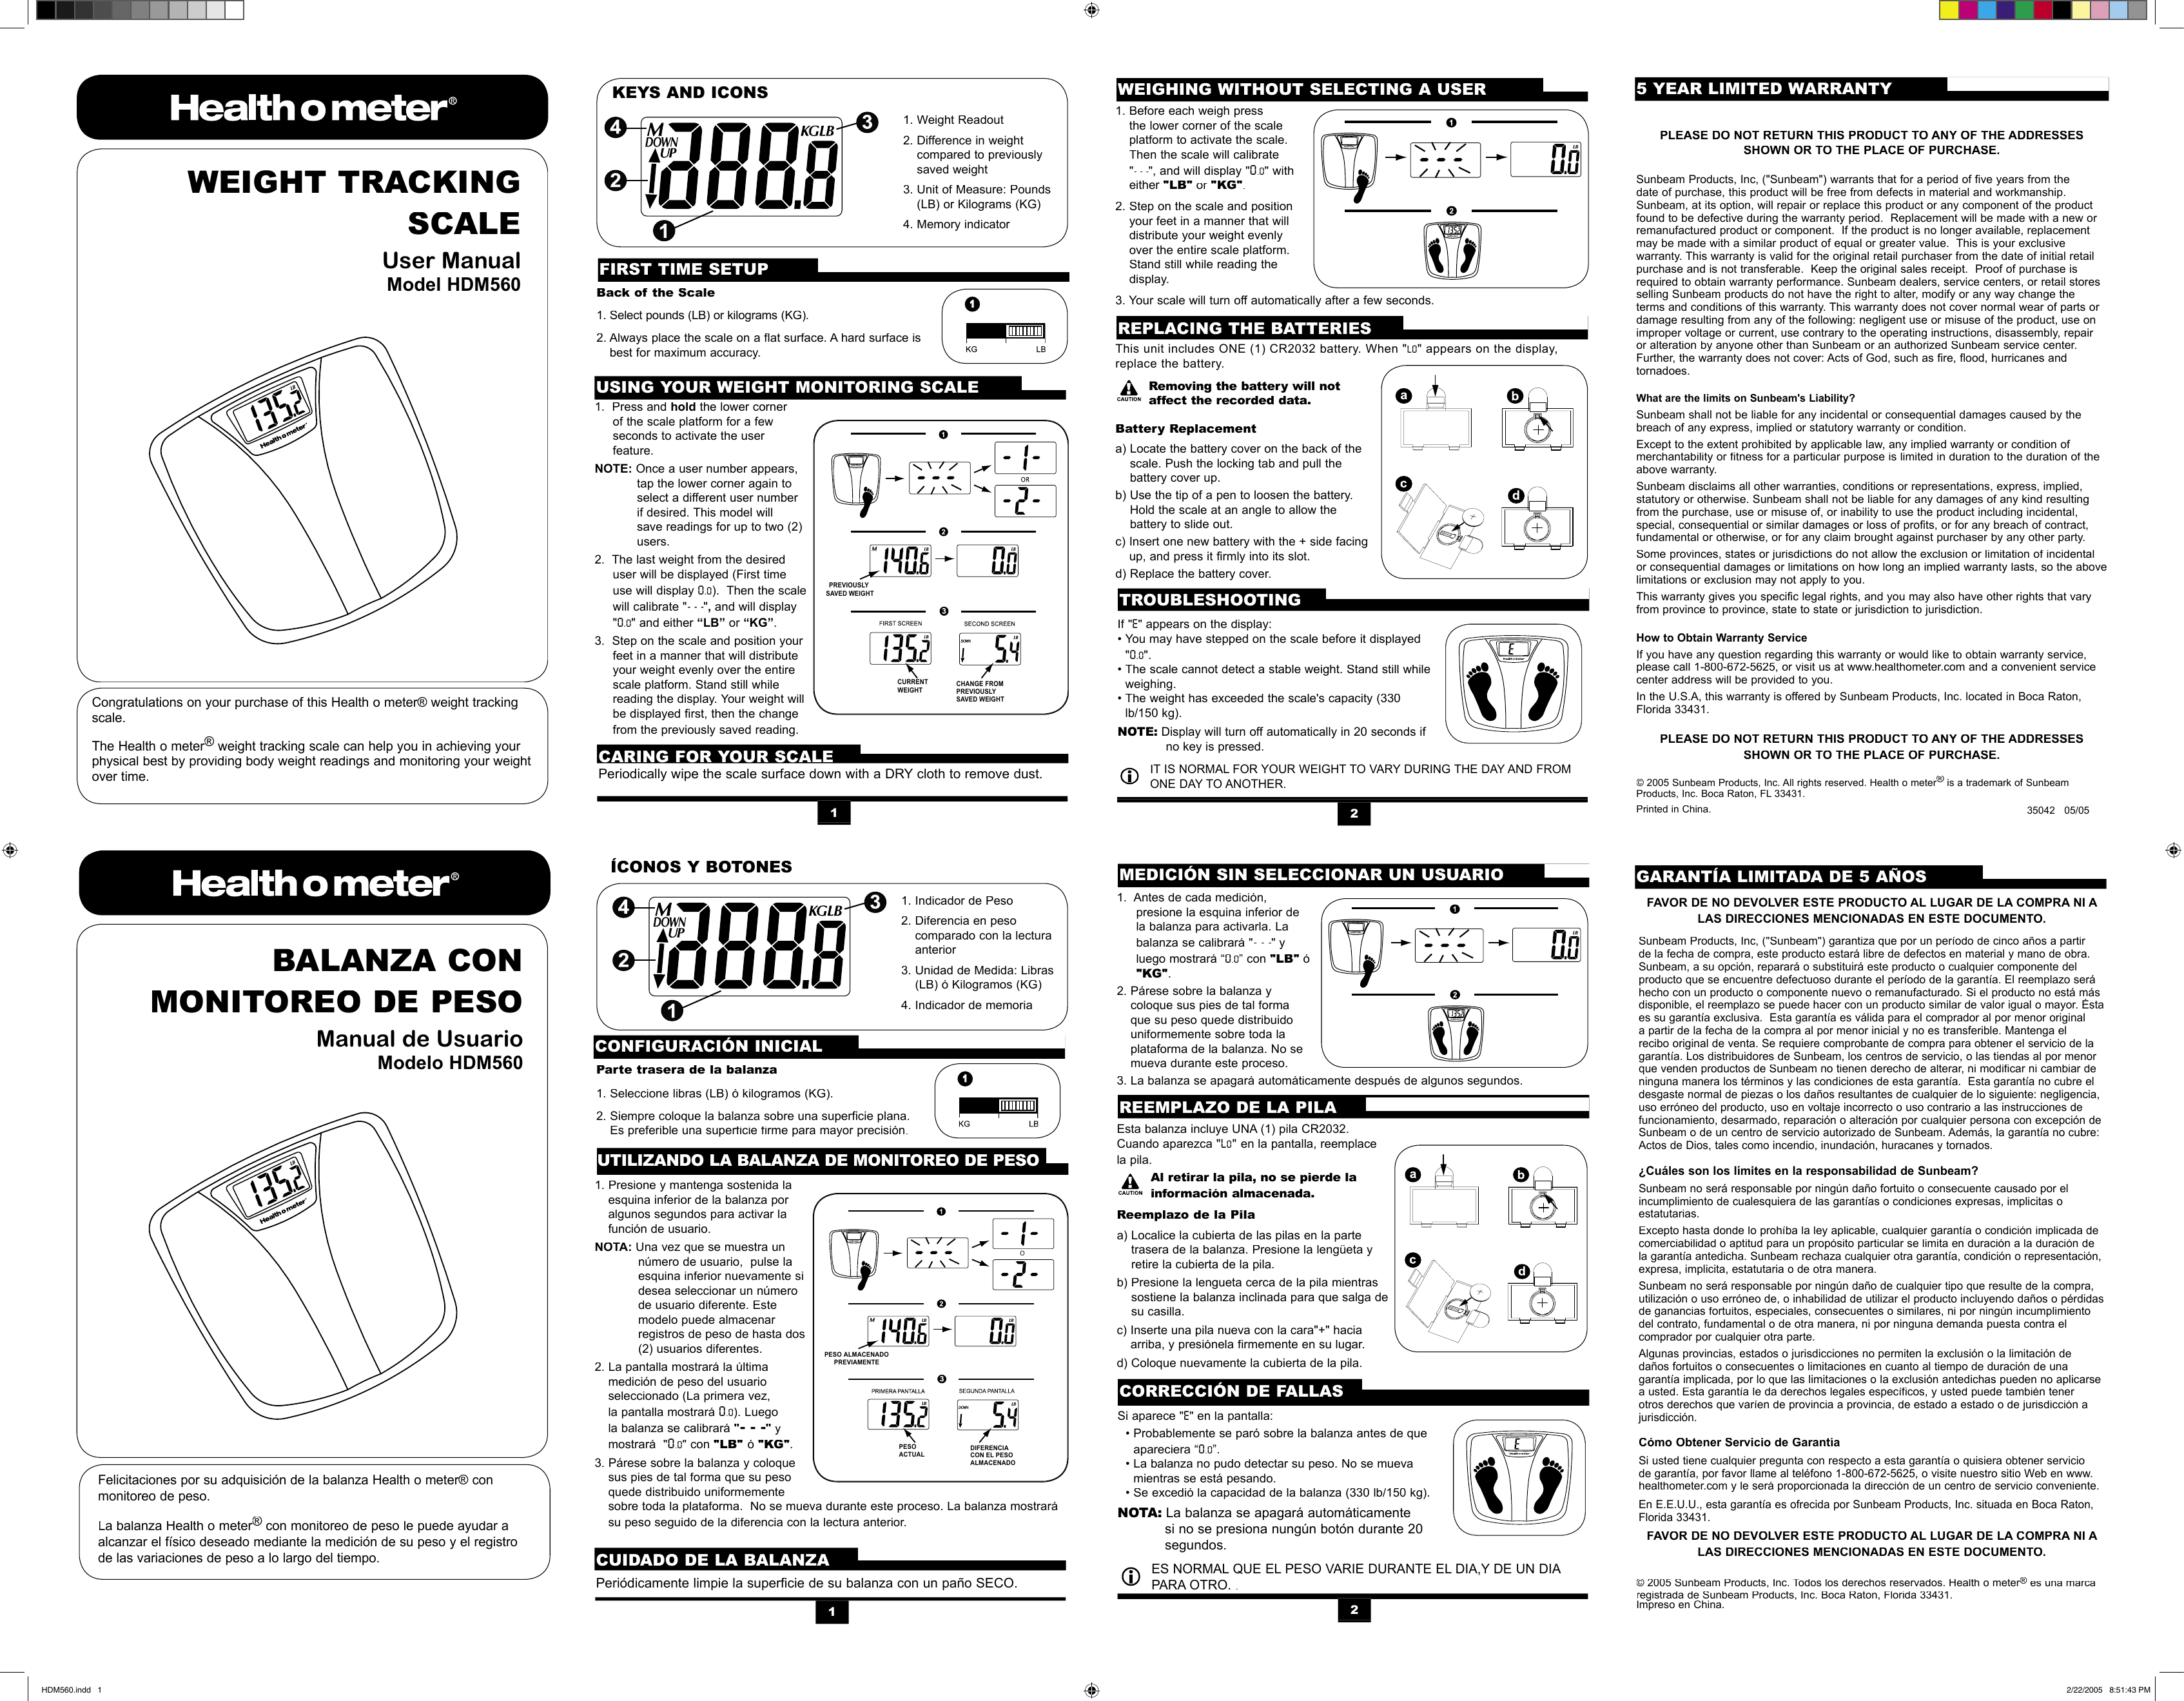 Page 1 of 1 - Health-O-Meter Health-O-Meter-Hdm560-05-Owner-S-Manual HDM560